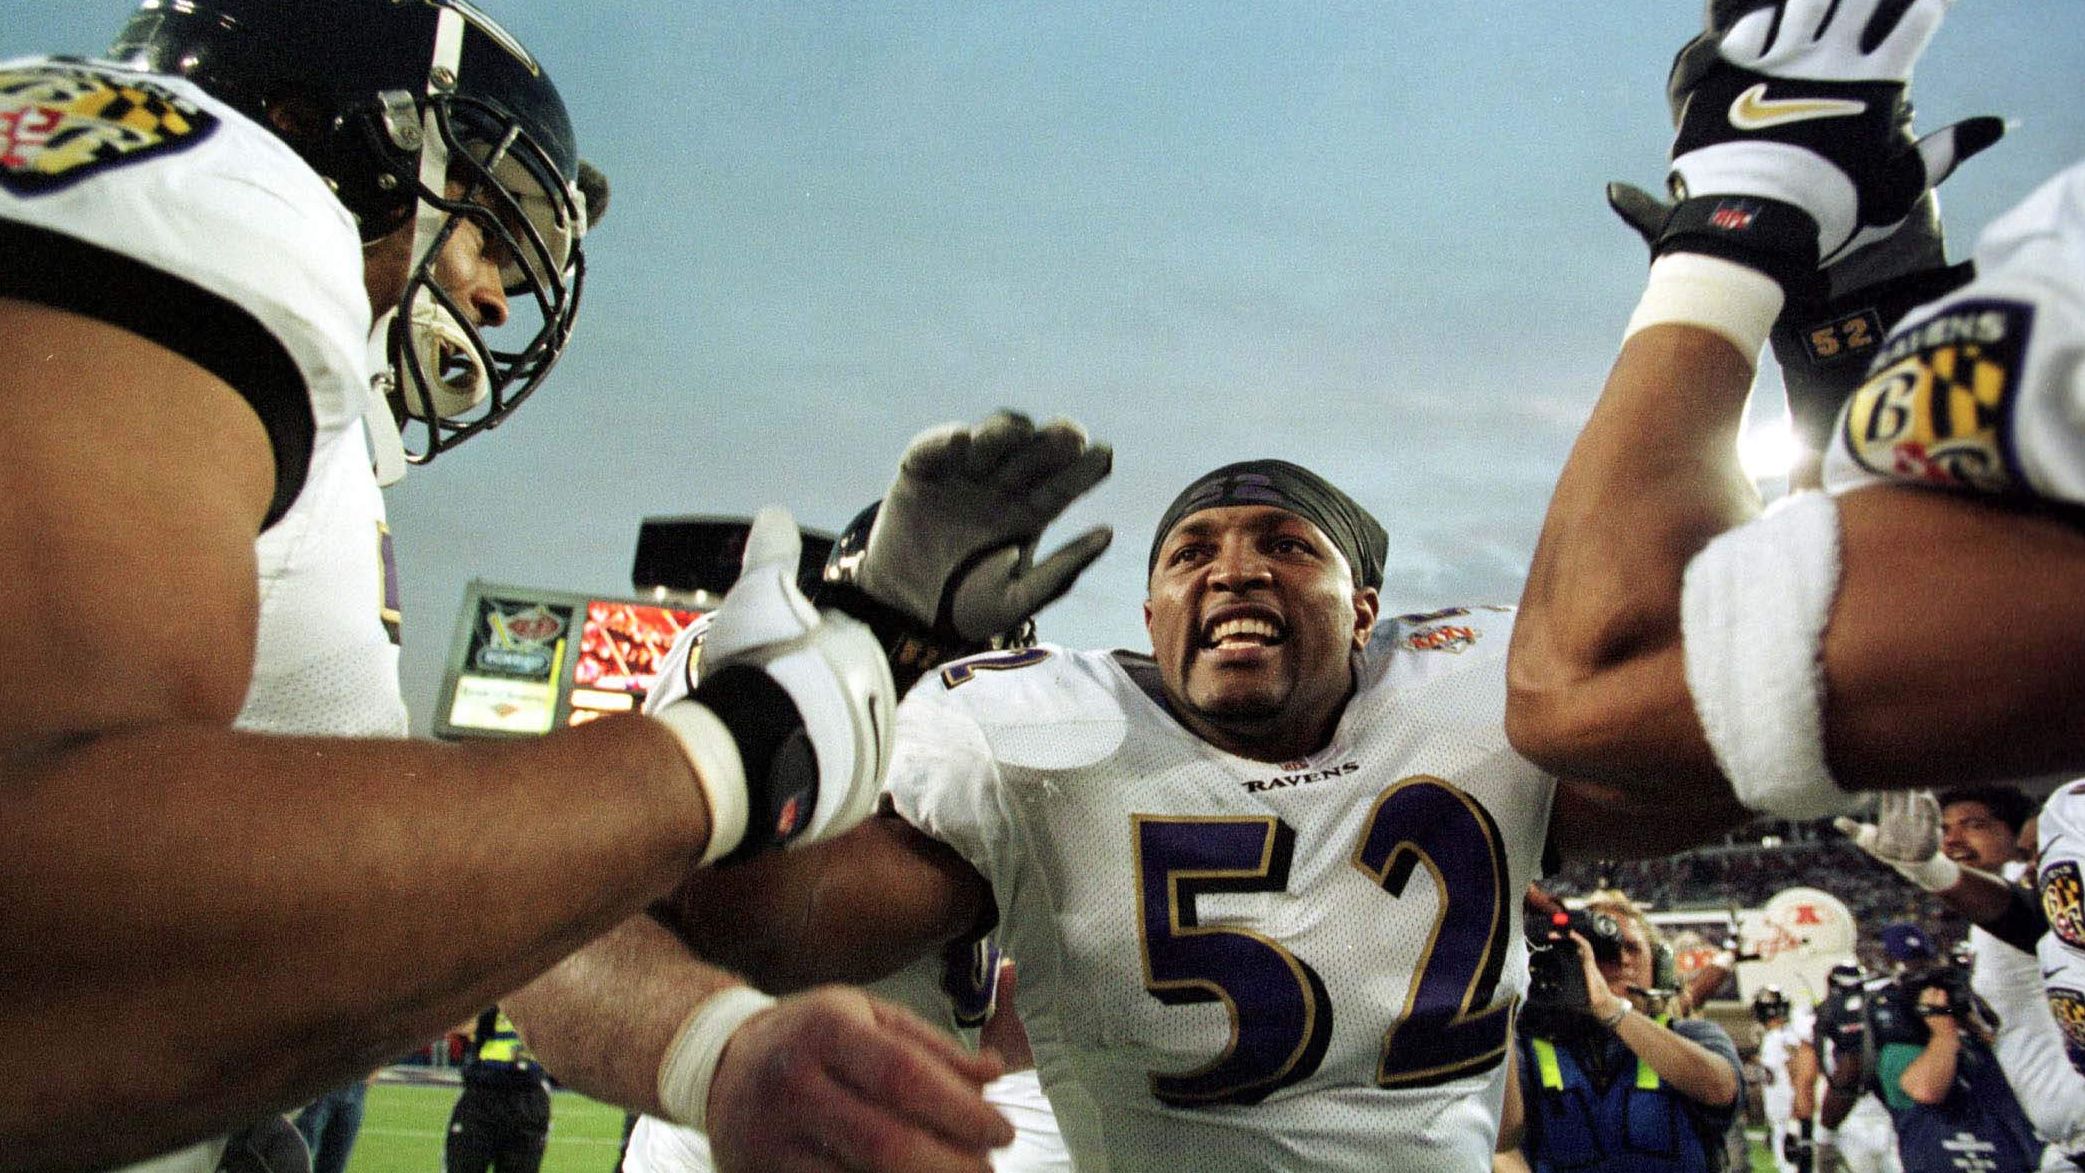 <strong>Super Bowl XXXV (2001):</strong> One year after a high-powered offense won the Super Bowl, it was a suffocating defense that won in 2001. MVP linebacker Ray Lewis set the tone for a Baltimore Ravens team that shut down the New York Giants en route to a 34-7 victory.